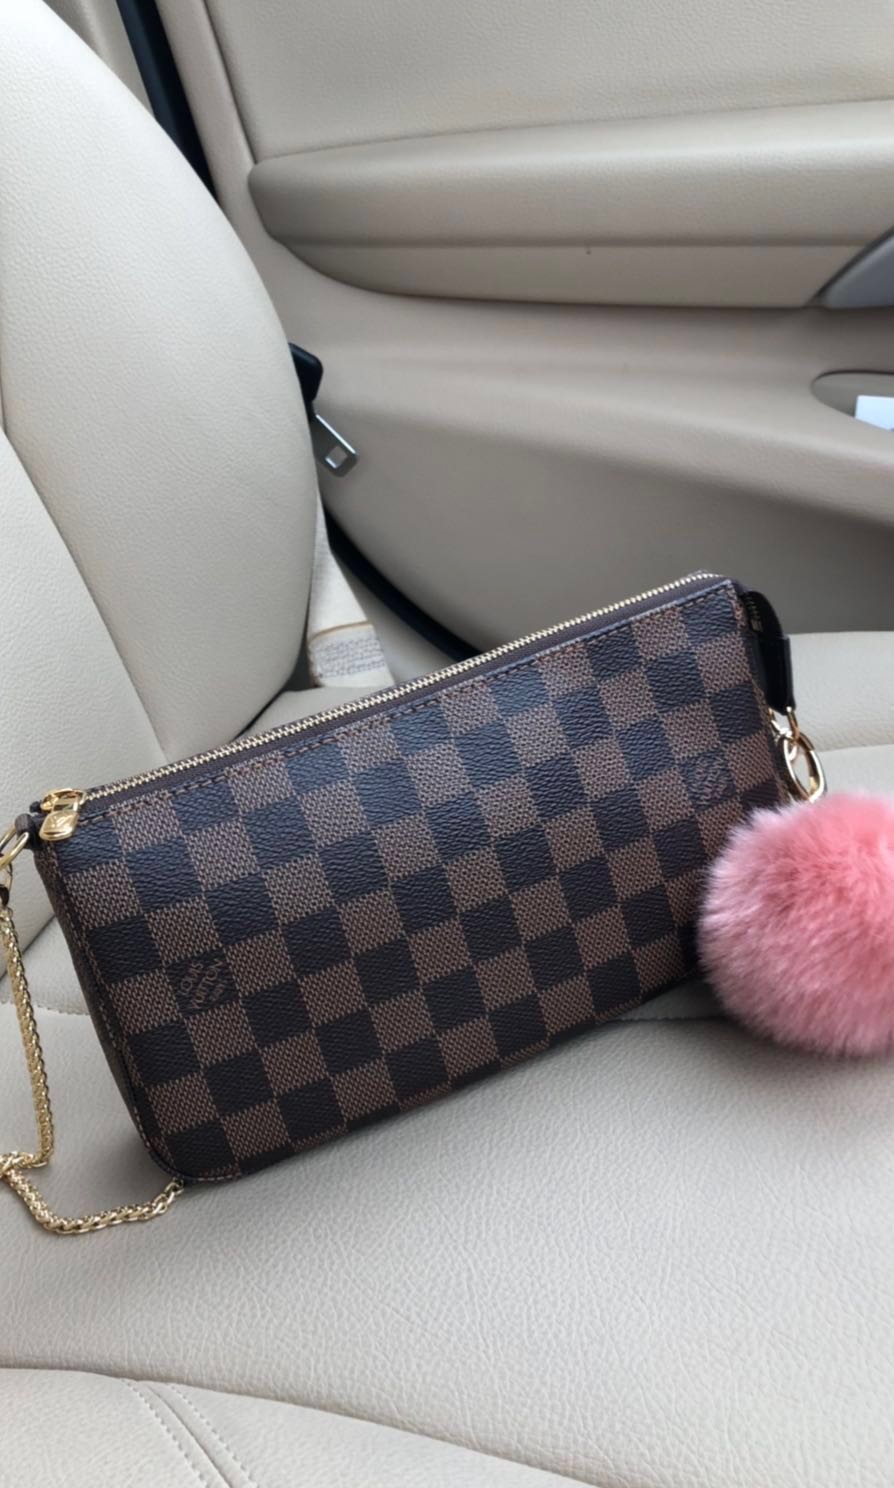 Louis Vuitton Pochette Accessorize Luxury Bags Wallets Clutches On Carousell